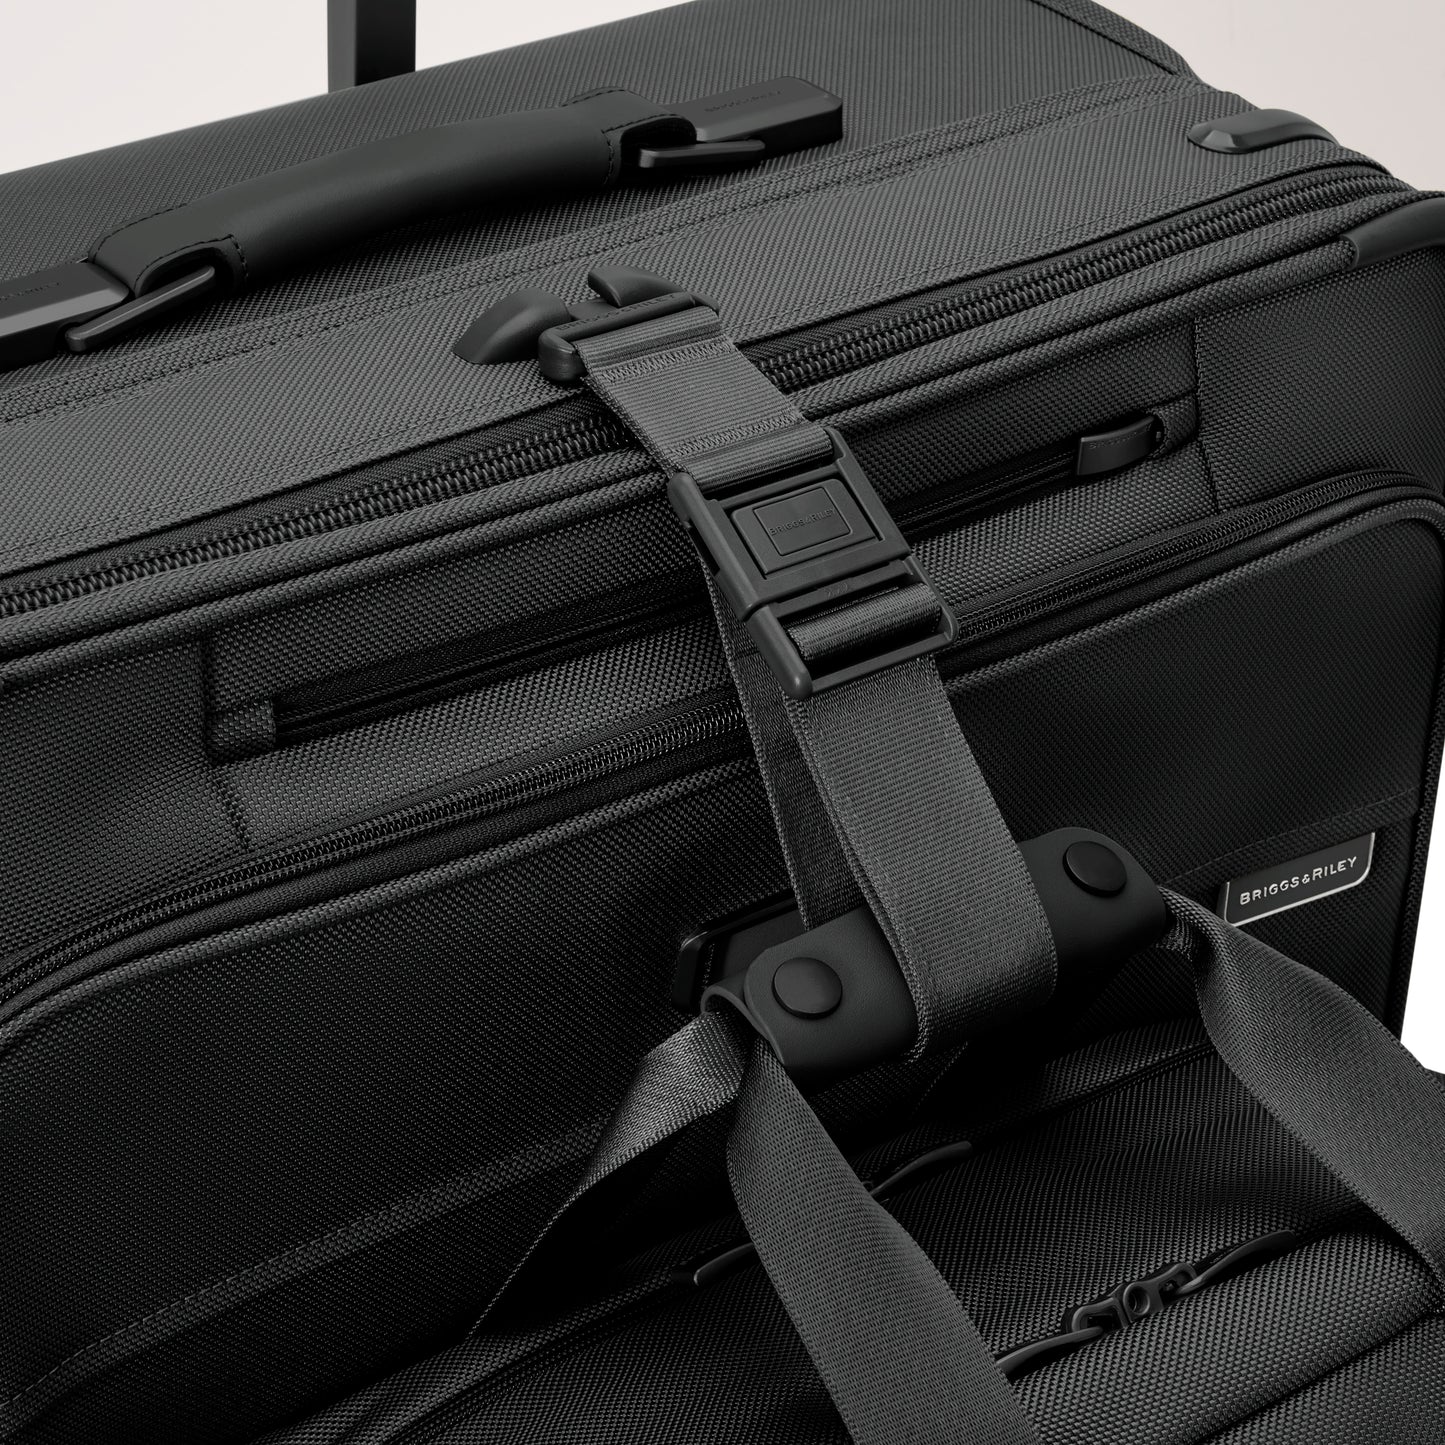 Briggs & Riley Baseline Compact Carry-On Spinner